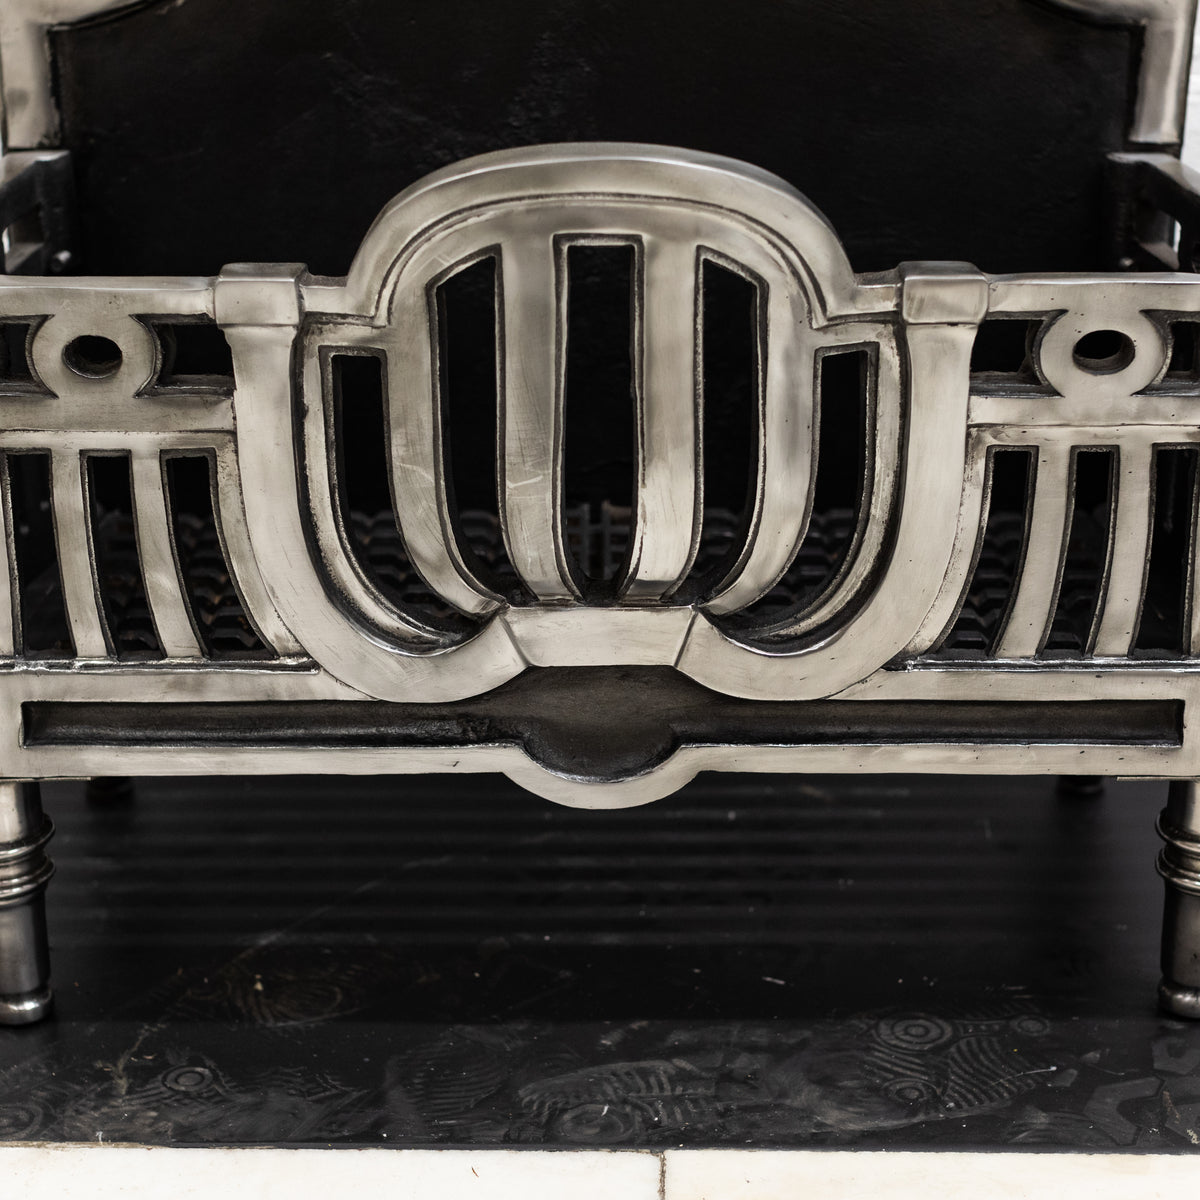 Reclaimed Polished Art Deco Style Fire Basket | The Architectural Forum